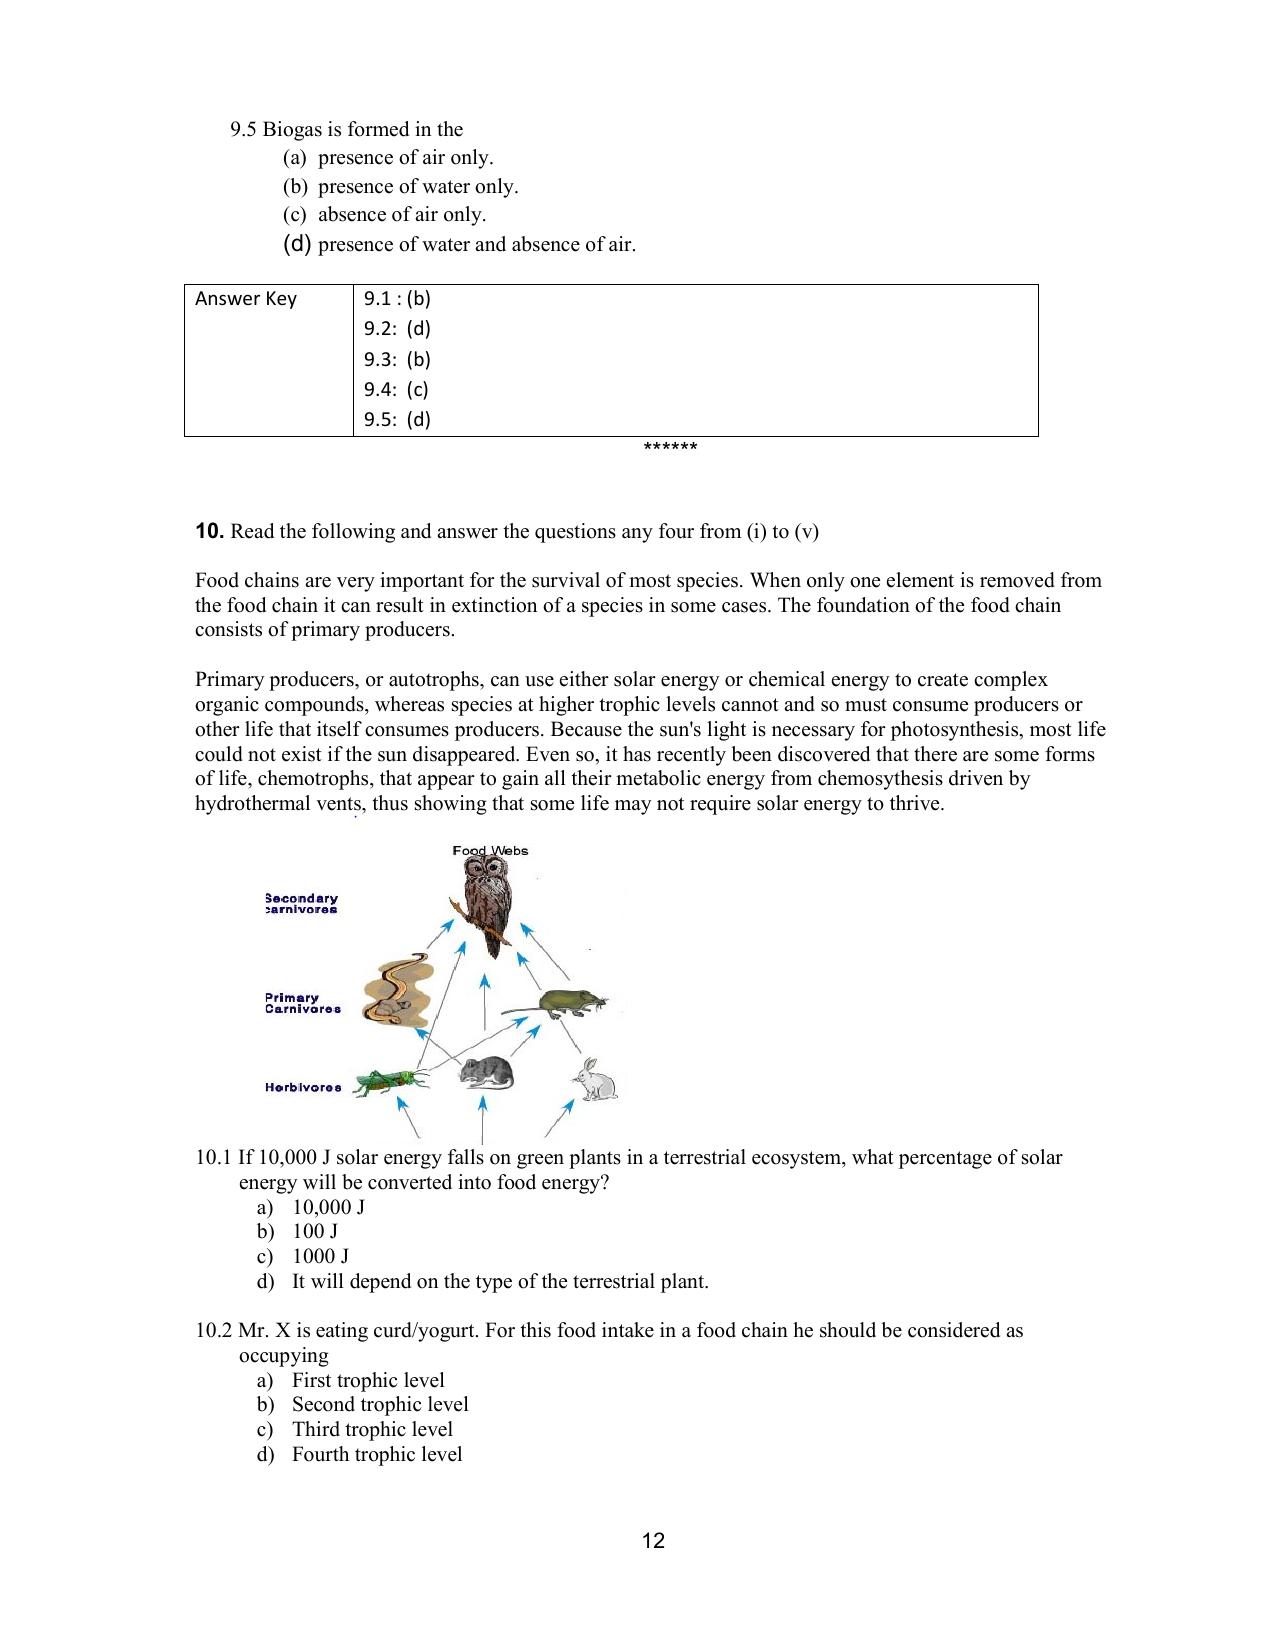 CBSE Class 10 Science Question Bank - Page 12